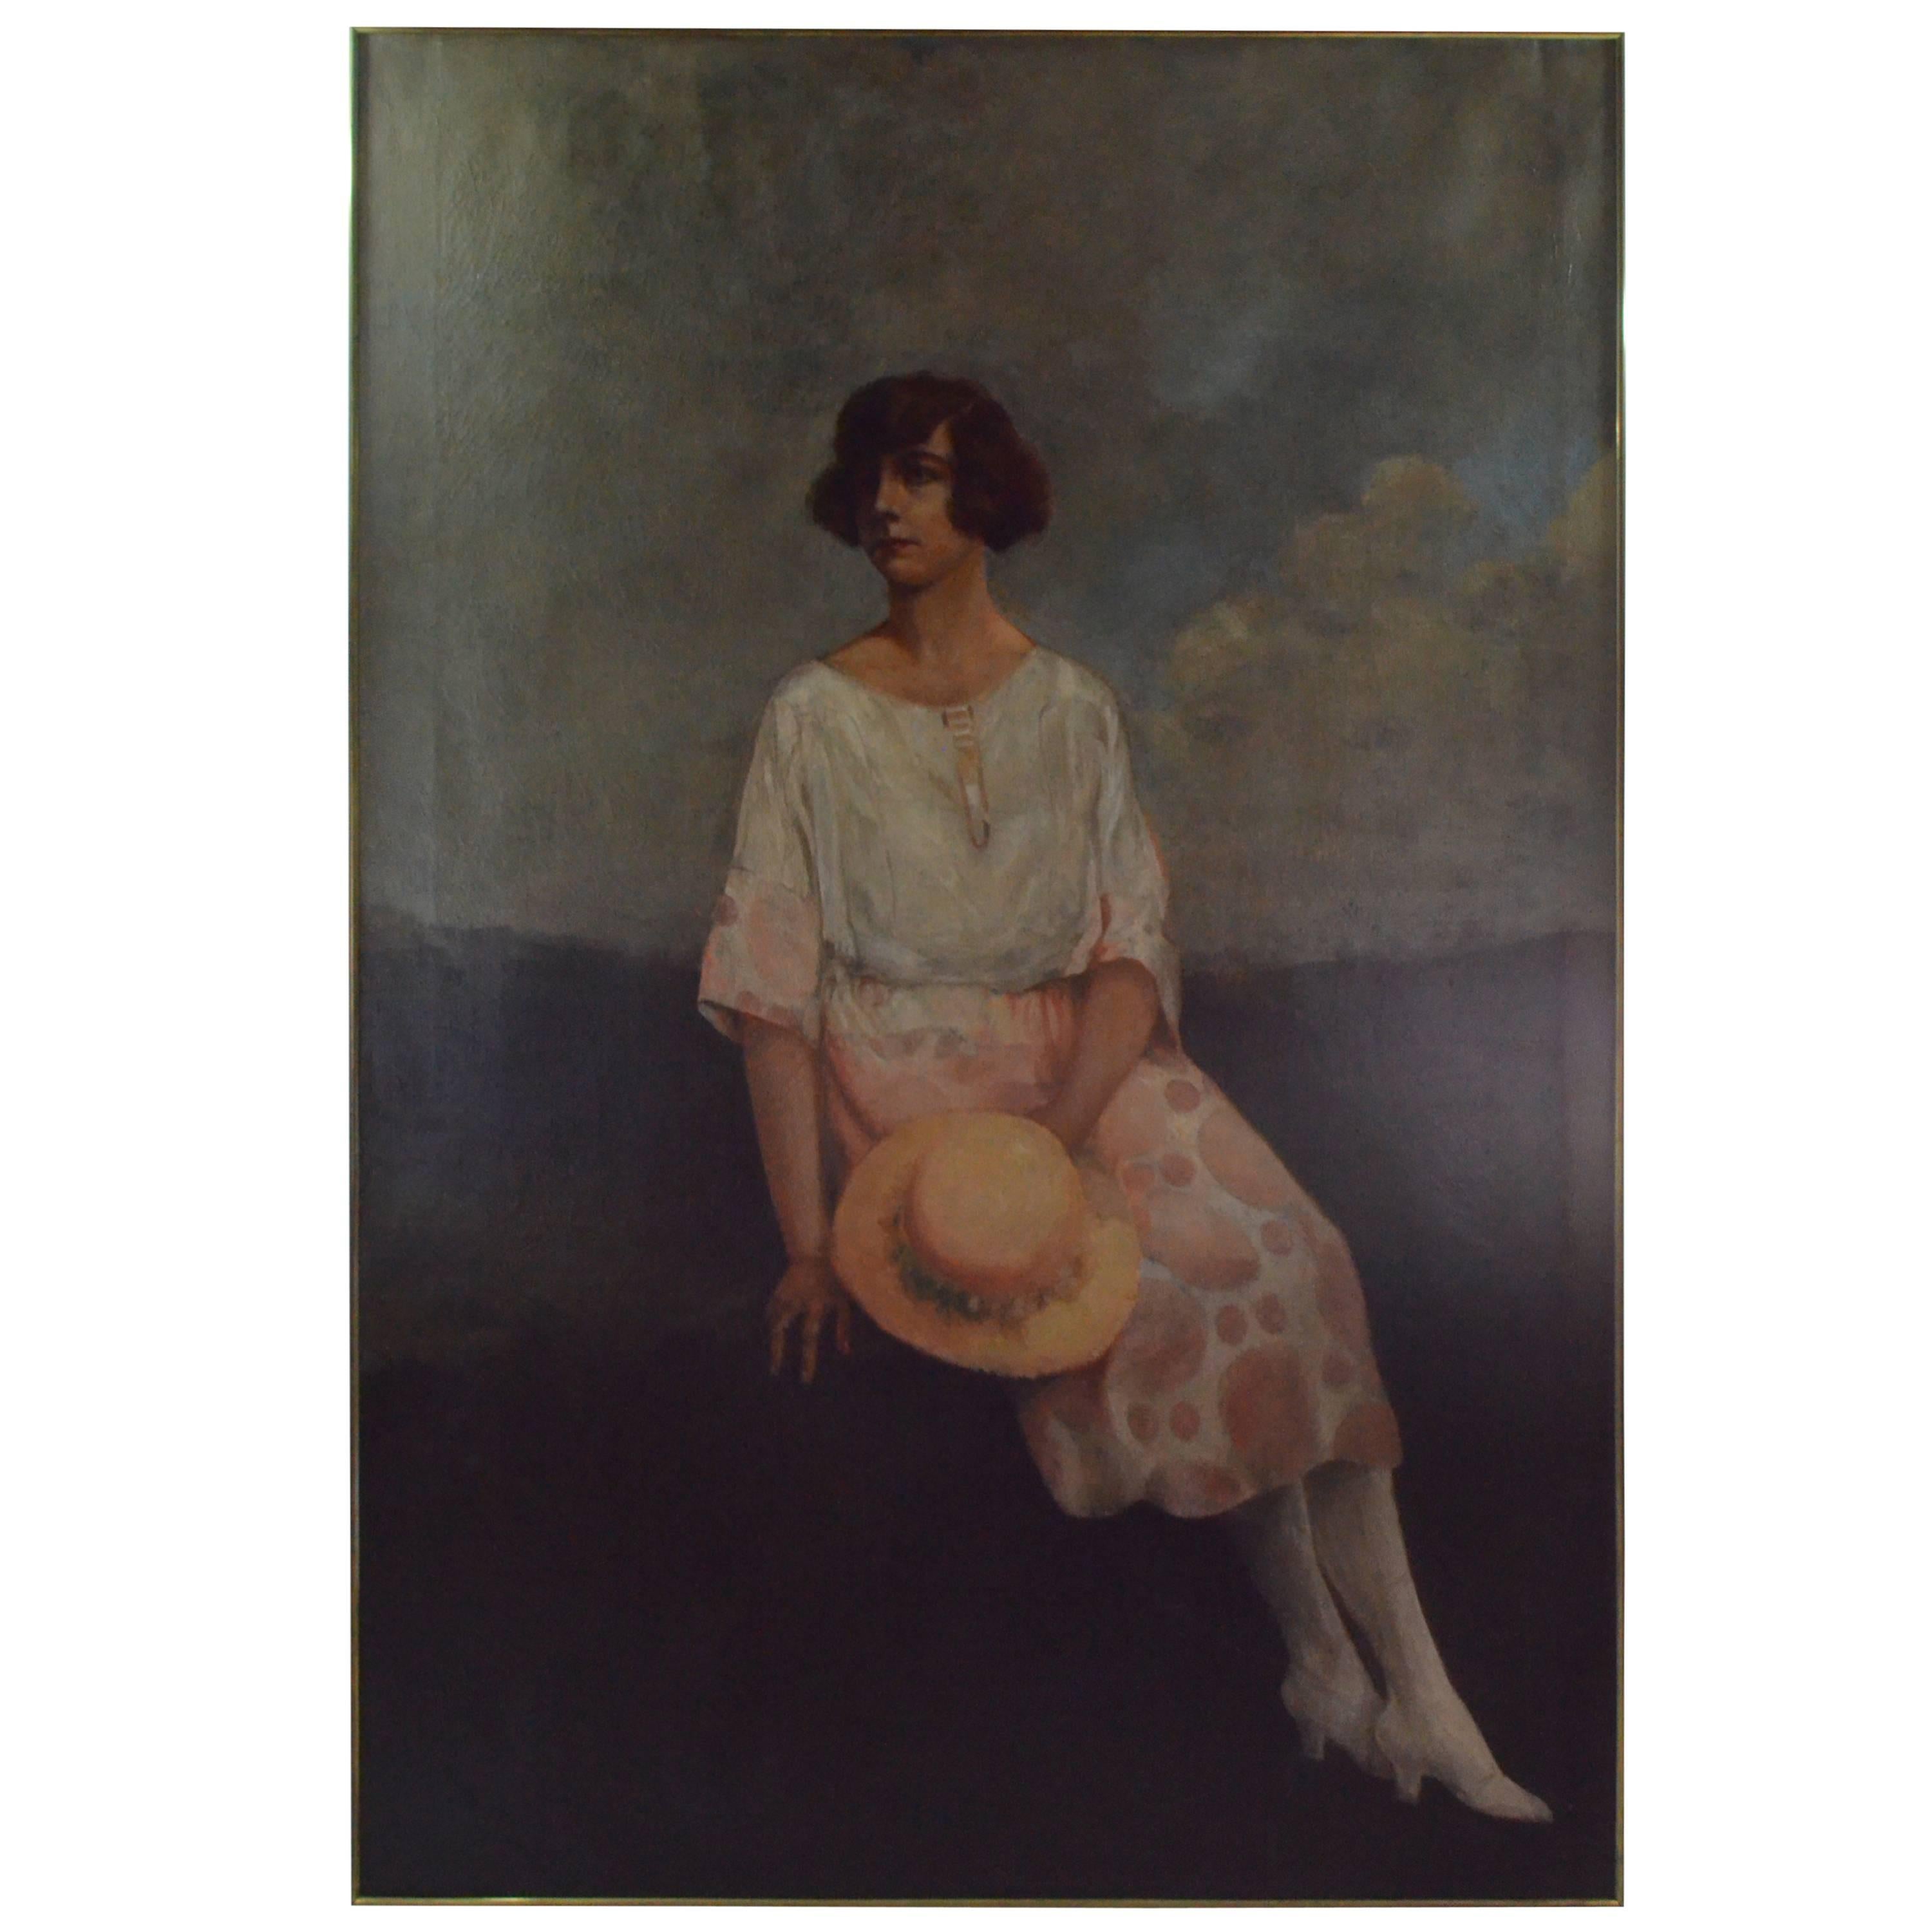 Art Deco Painting Young Woman Portrait Oil on Canvas, Dated 1920